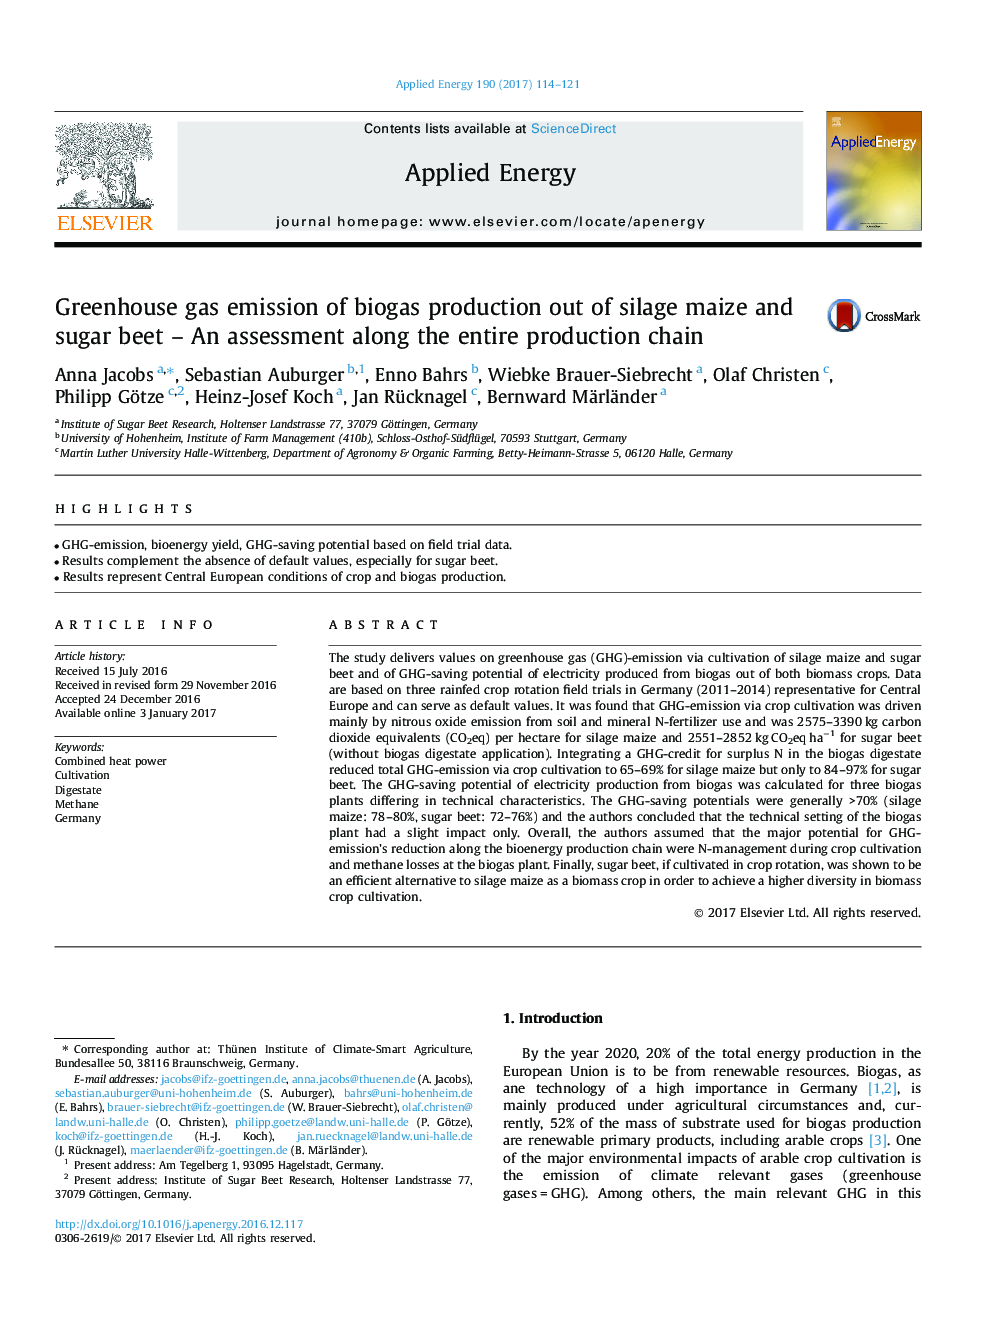 Greenhouse gas emission of biogas production out of silage maize and sugar beet - An assessment along the entire production chain